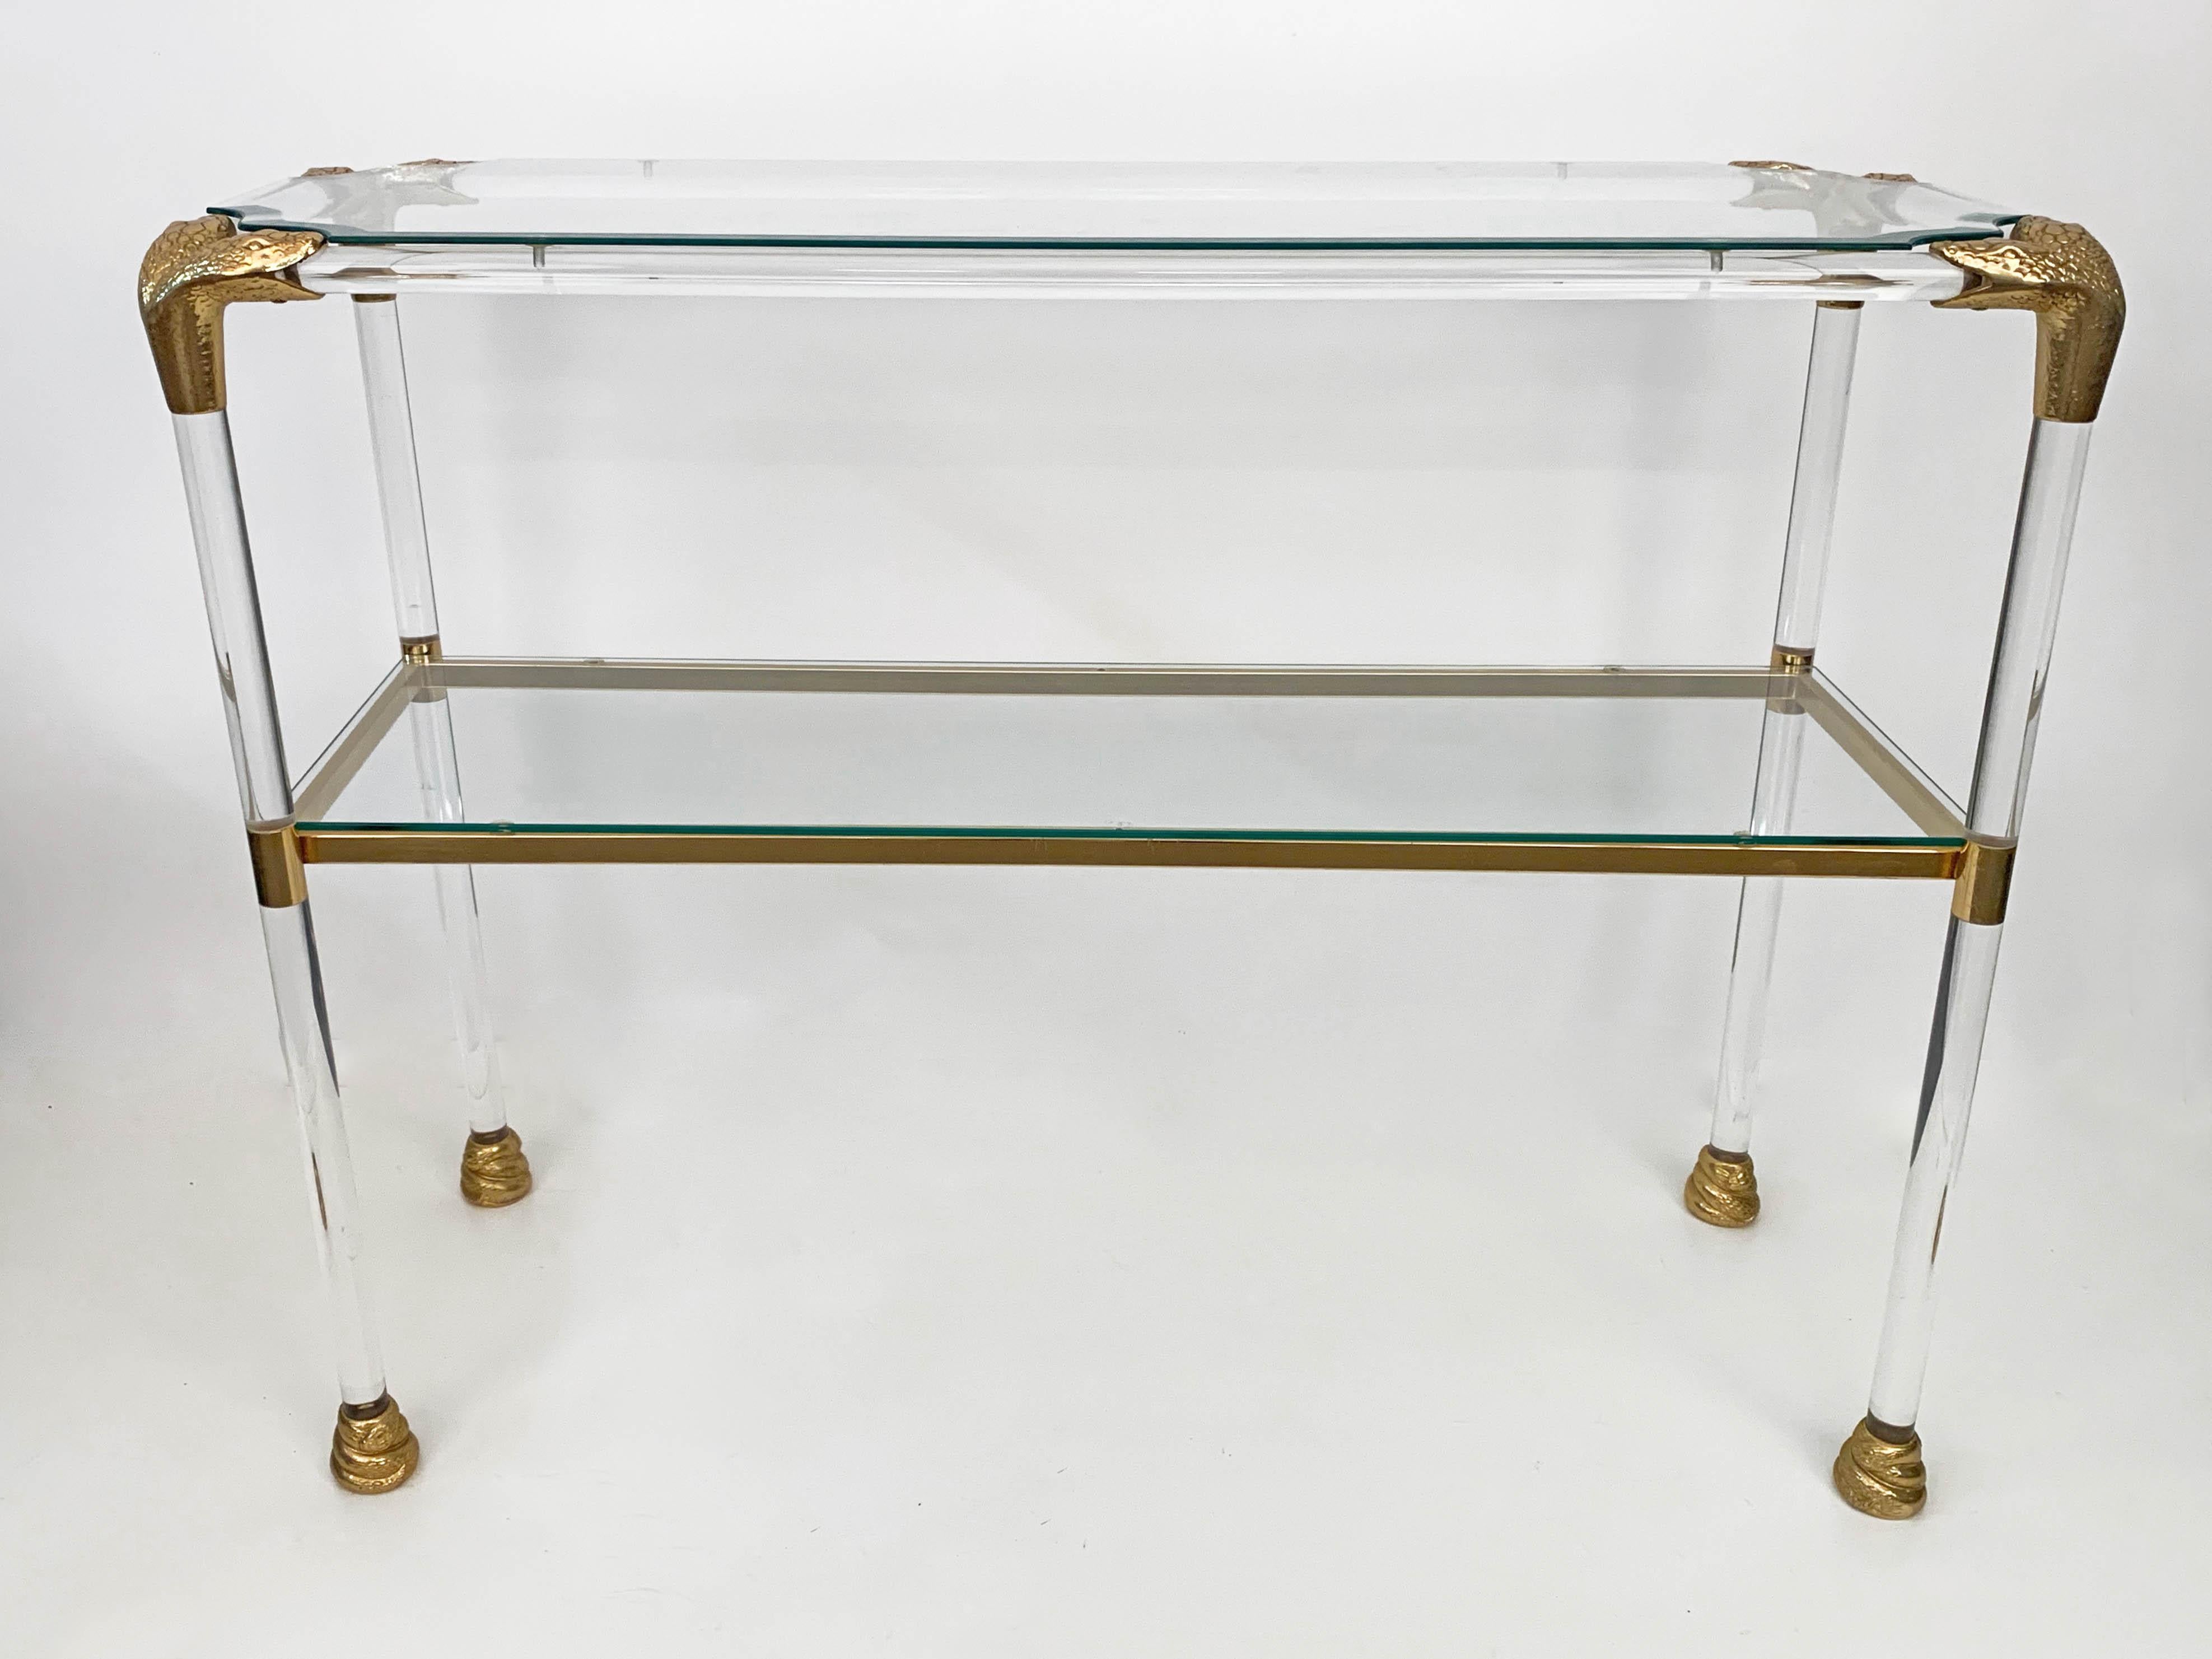 Midcentury Lucite and Brass Italian Console Table with Snake Head Finishes 1970s 1